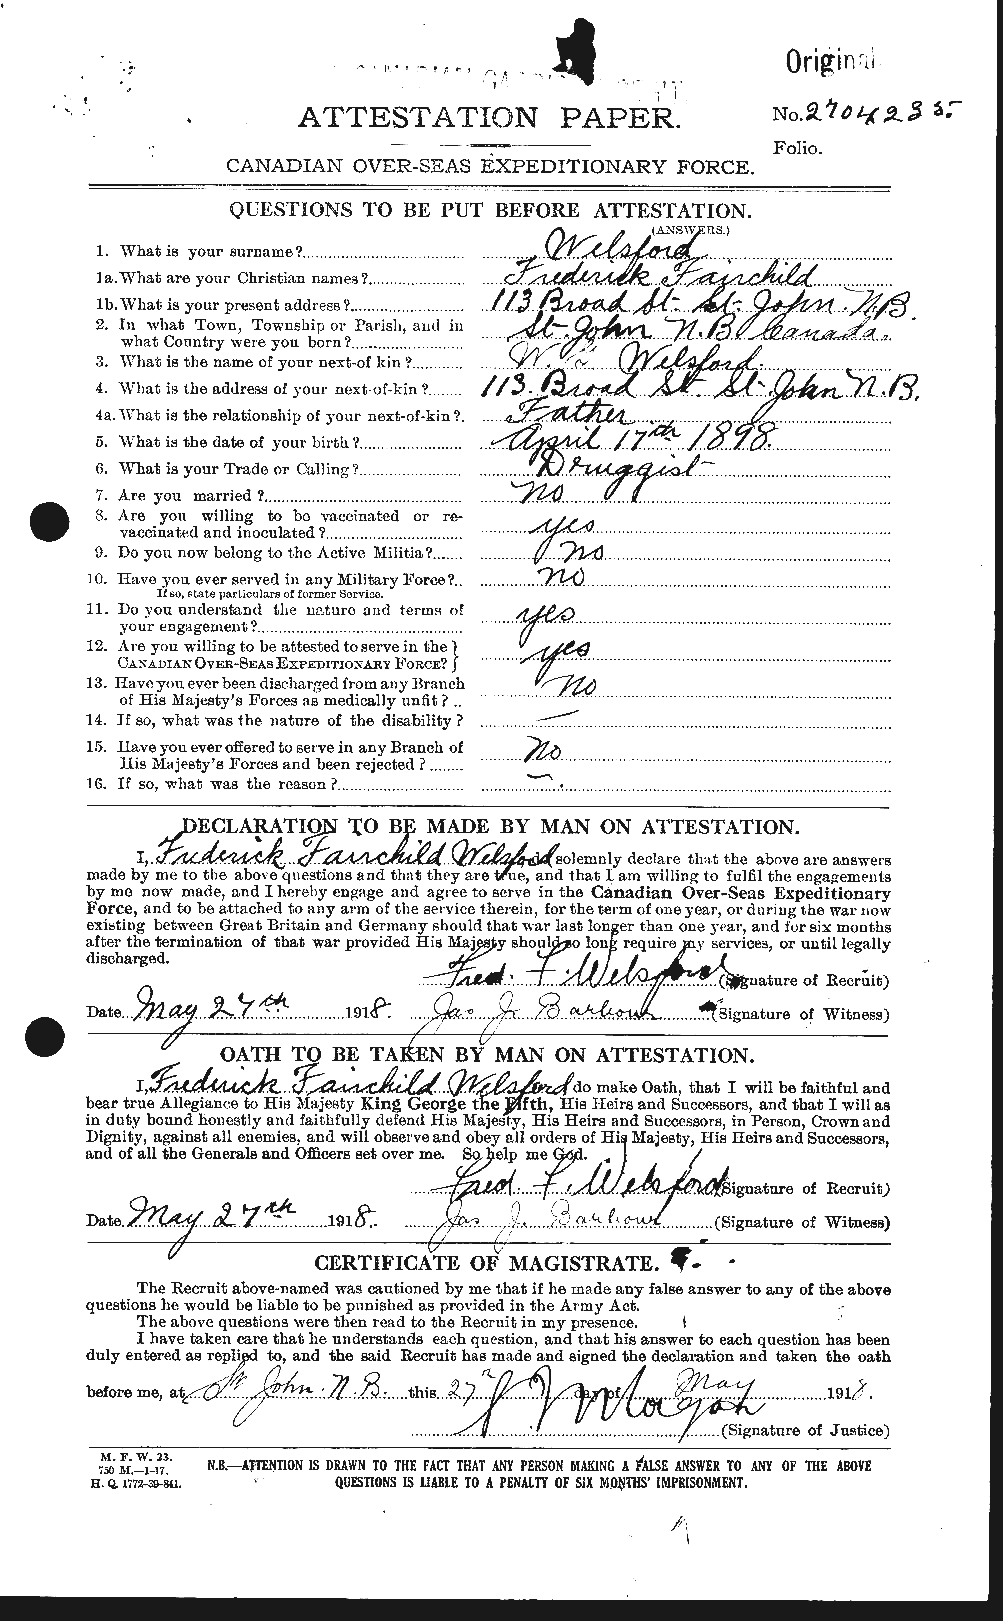 Personnel Records of the First World War - CEF 665402a